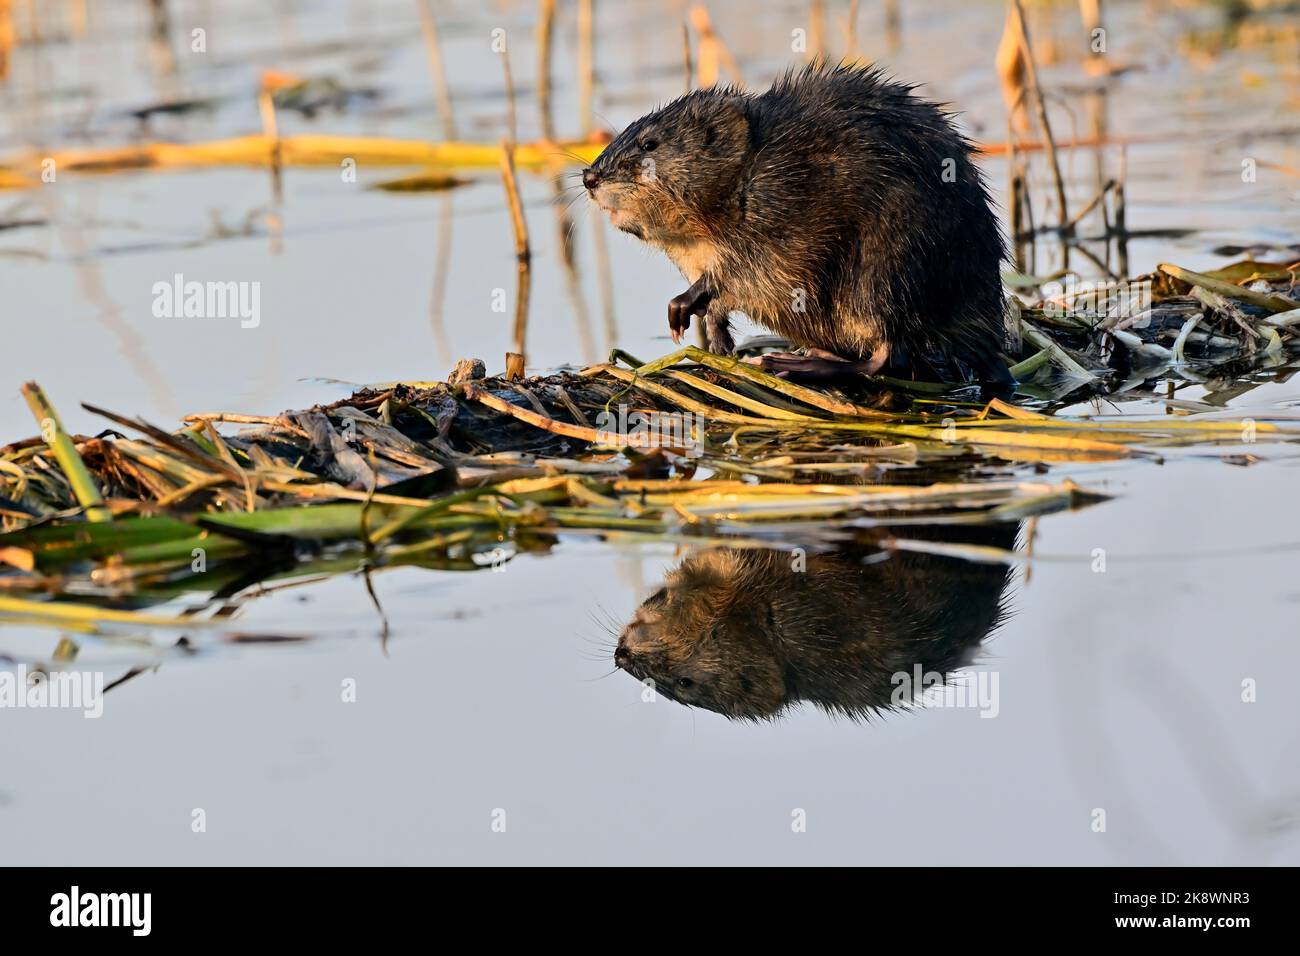 A wild Muskrat 'Ondatra zibethicus', foraging on a log in a marshy area in rural Alberta Canada. Stock Photo